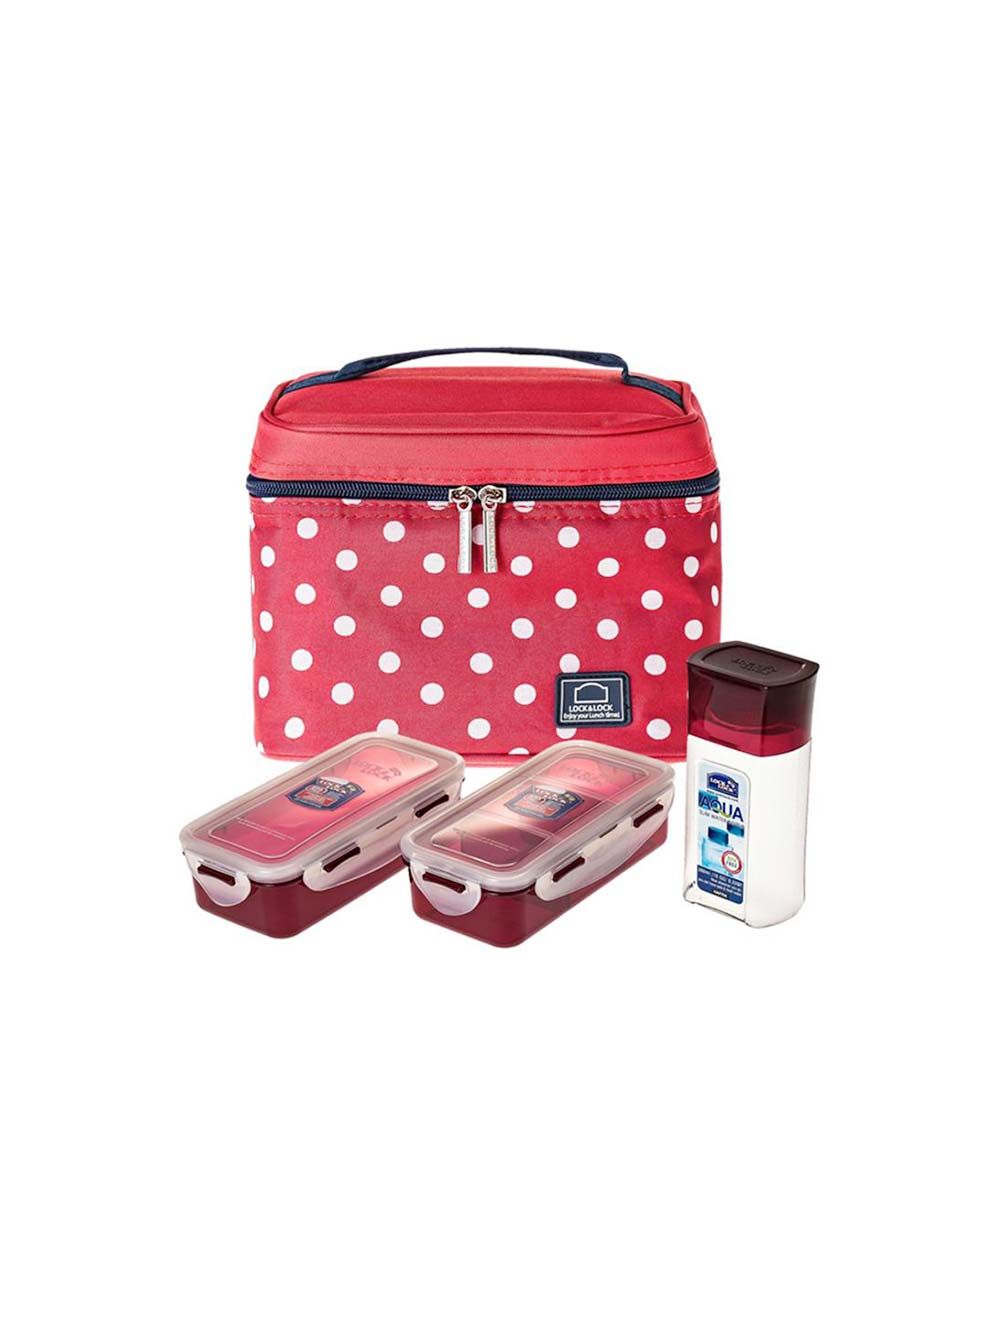 Lock & Lock Lunch Box 4pc-Set - 1pc Dotted Bag Red, 2pcs Food Container, 1pc Water Bottle-HPL758S3DR